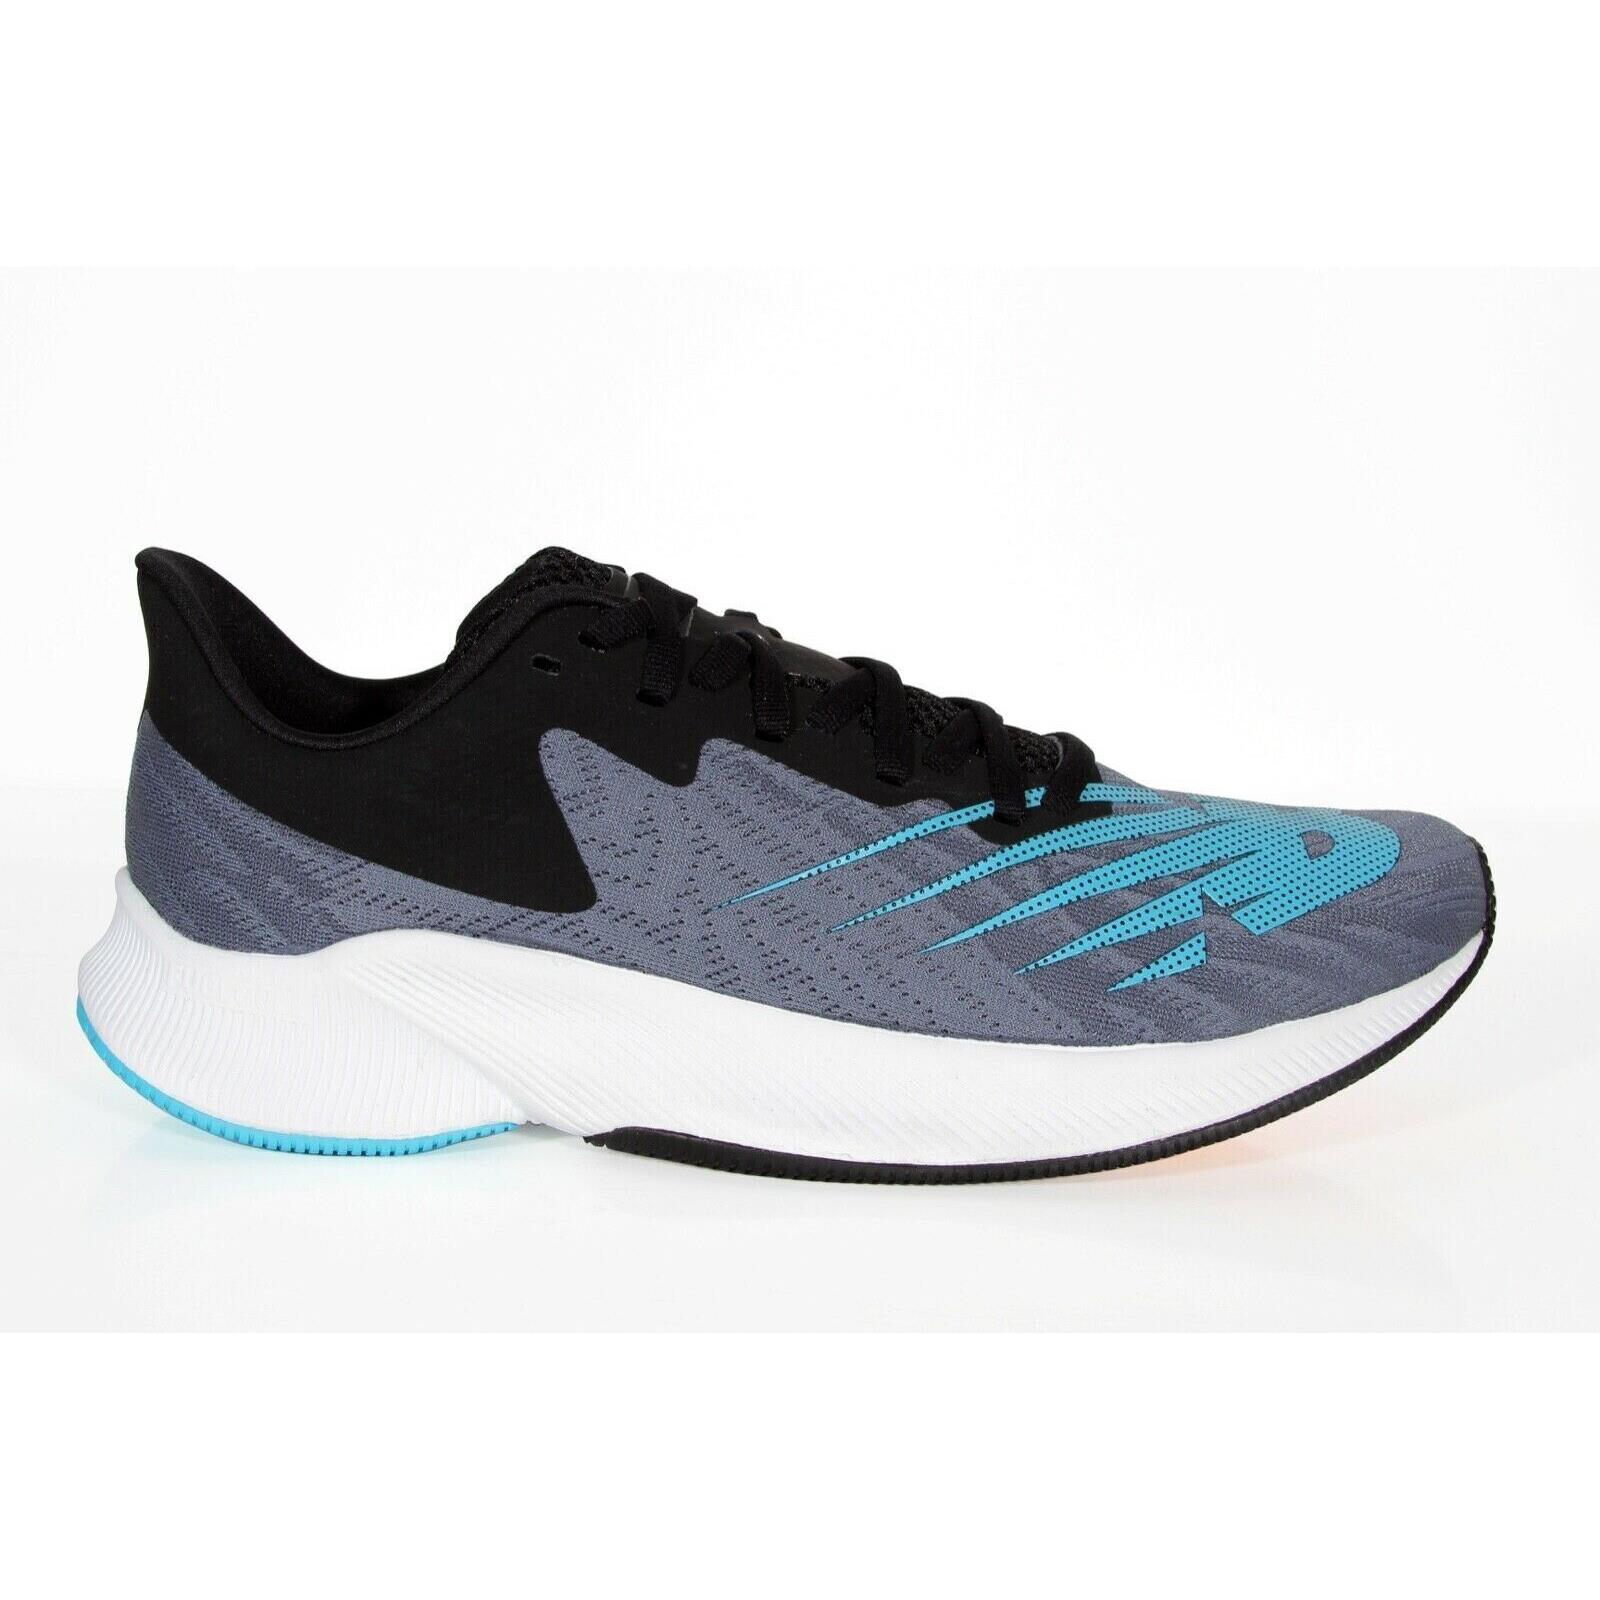 New Balance Men`s Fuelcell Prism Men`s Running Shoes Training Size 12 Ee-width Mfcpzcg